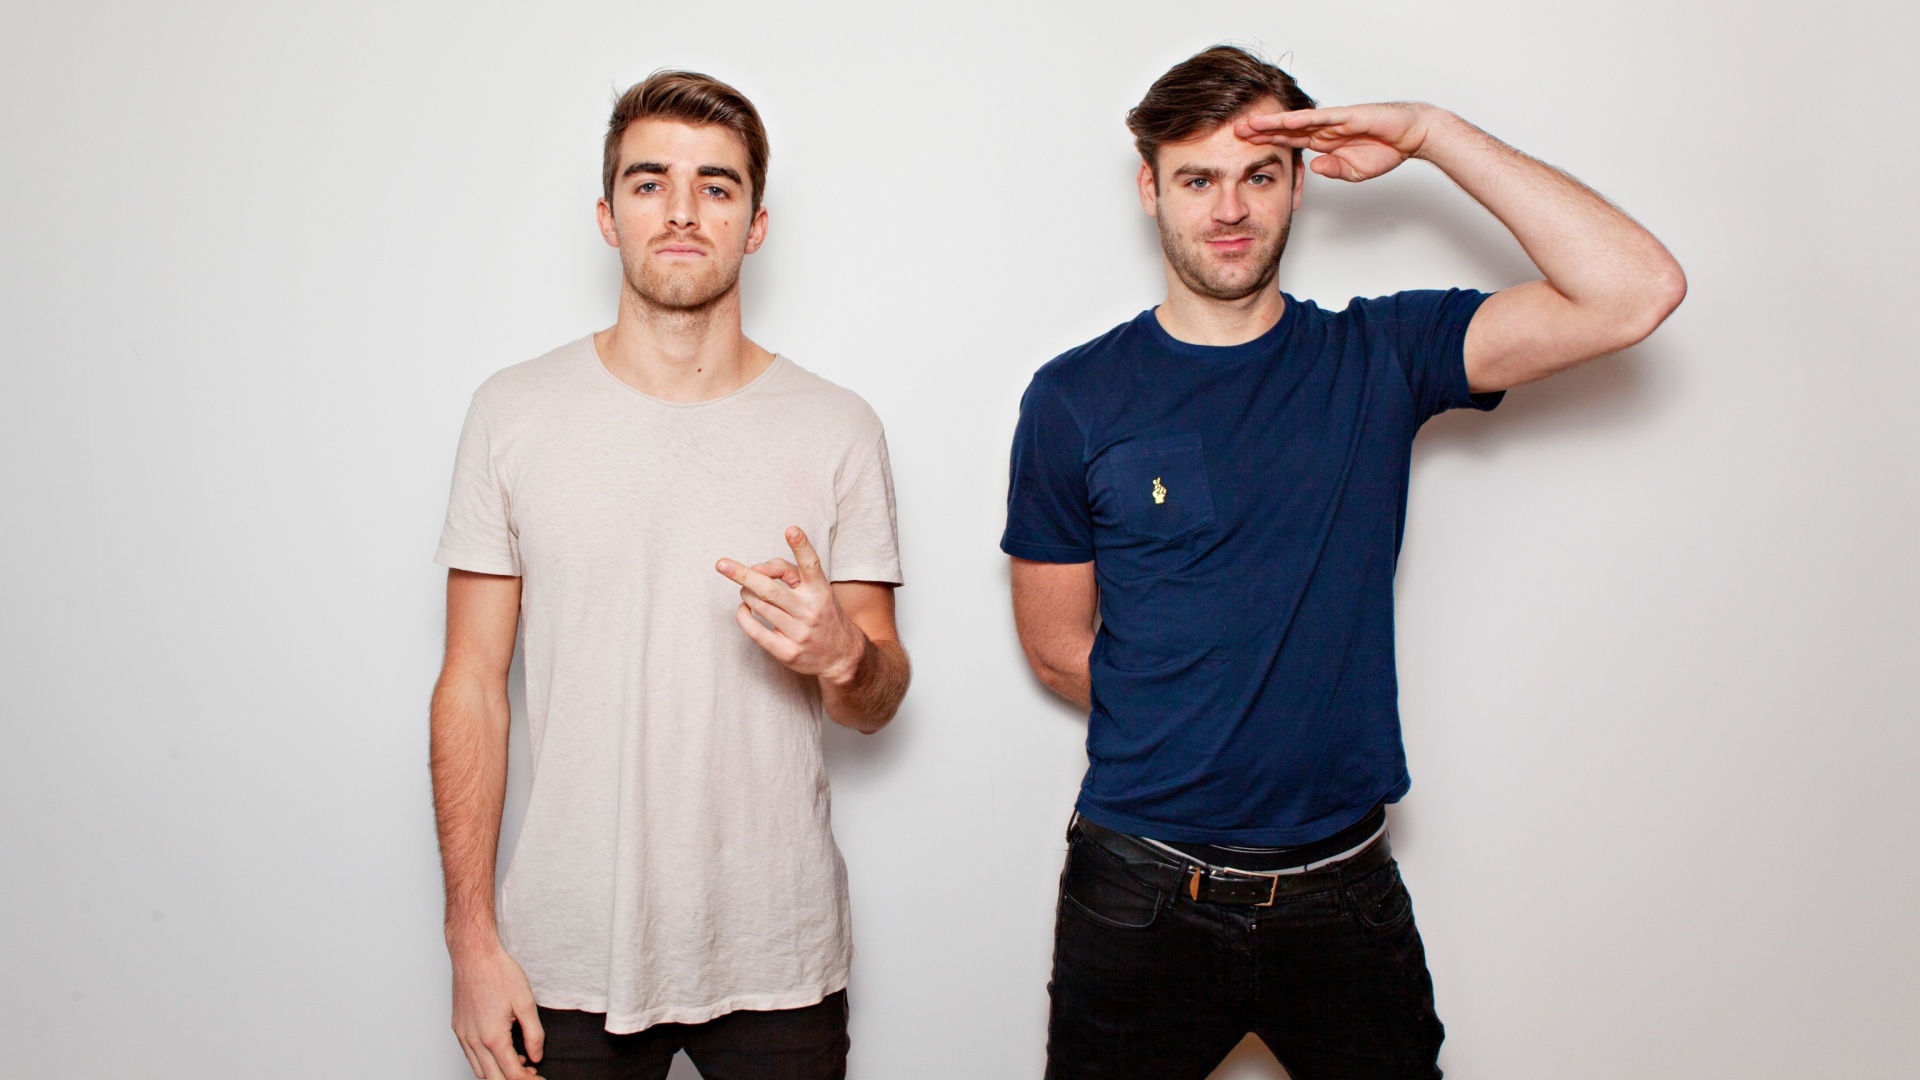 Das The Chainsmokers with Andrew Taggart and Alex Pall Wallpaper 1920x1080